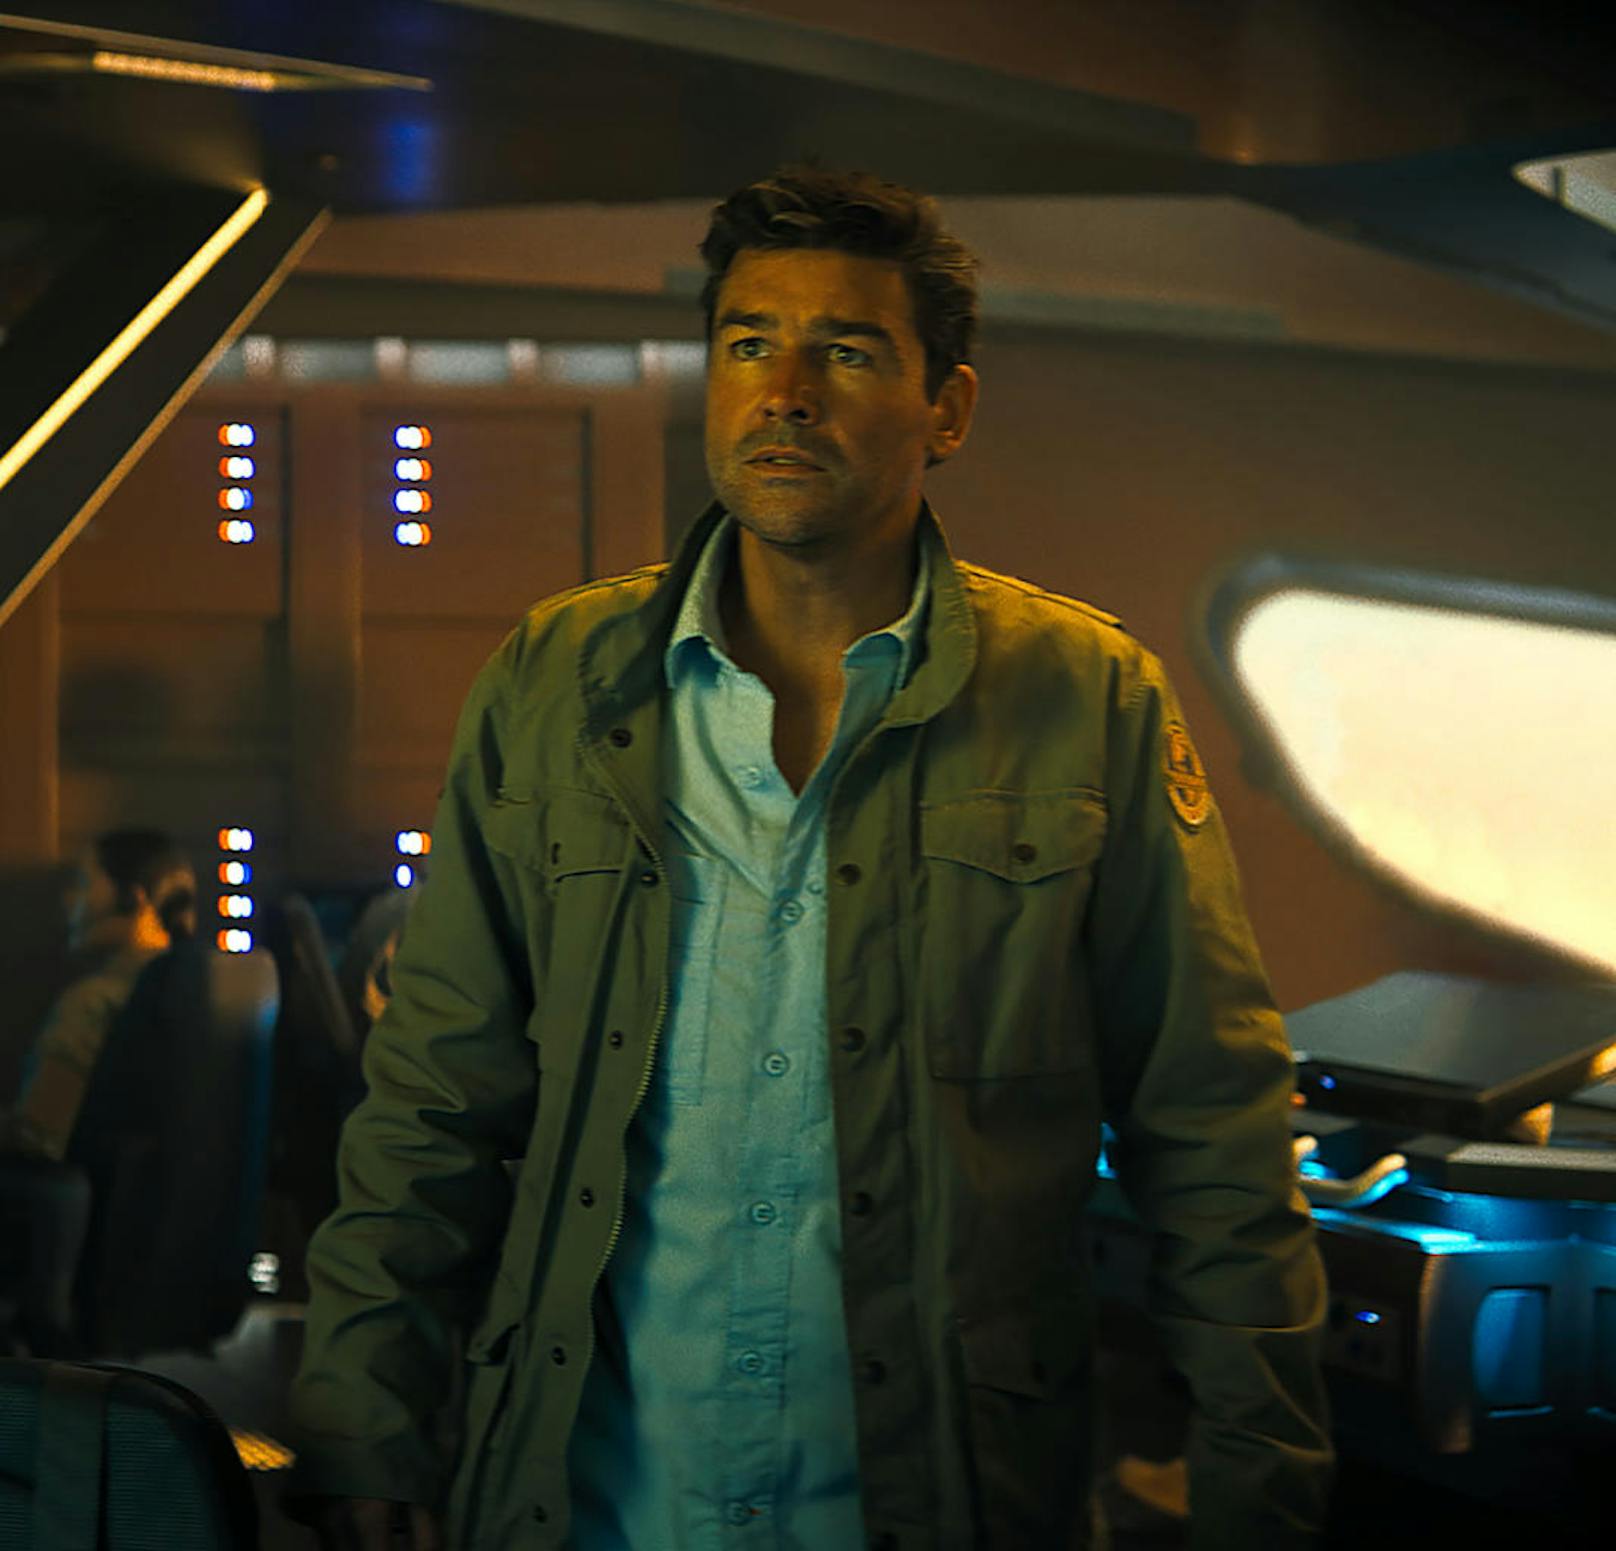 Kyle Chandler als Dr. Mark Russell in "Godzilla: King of the Monsters"